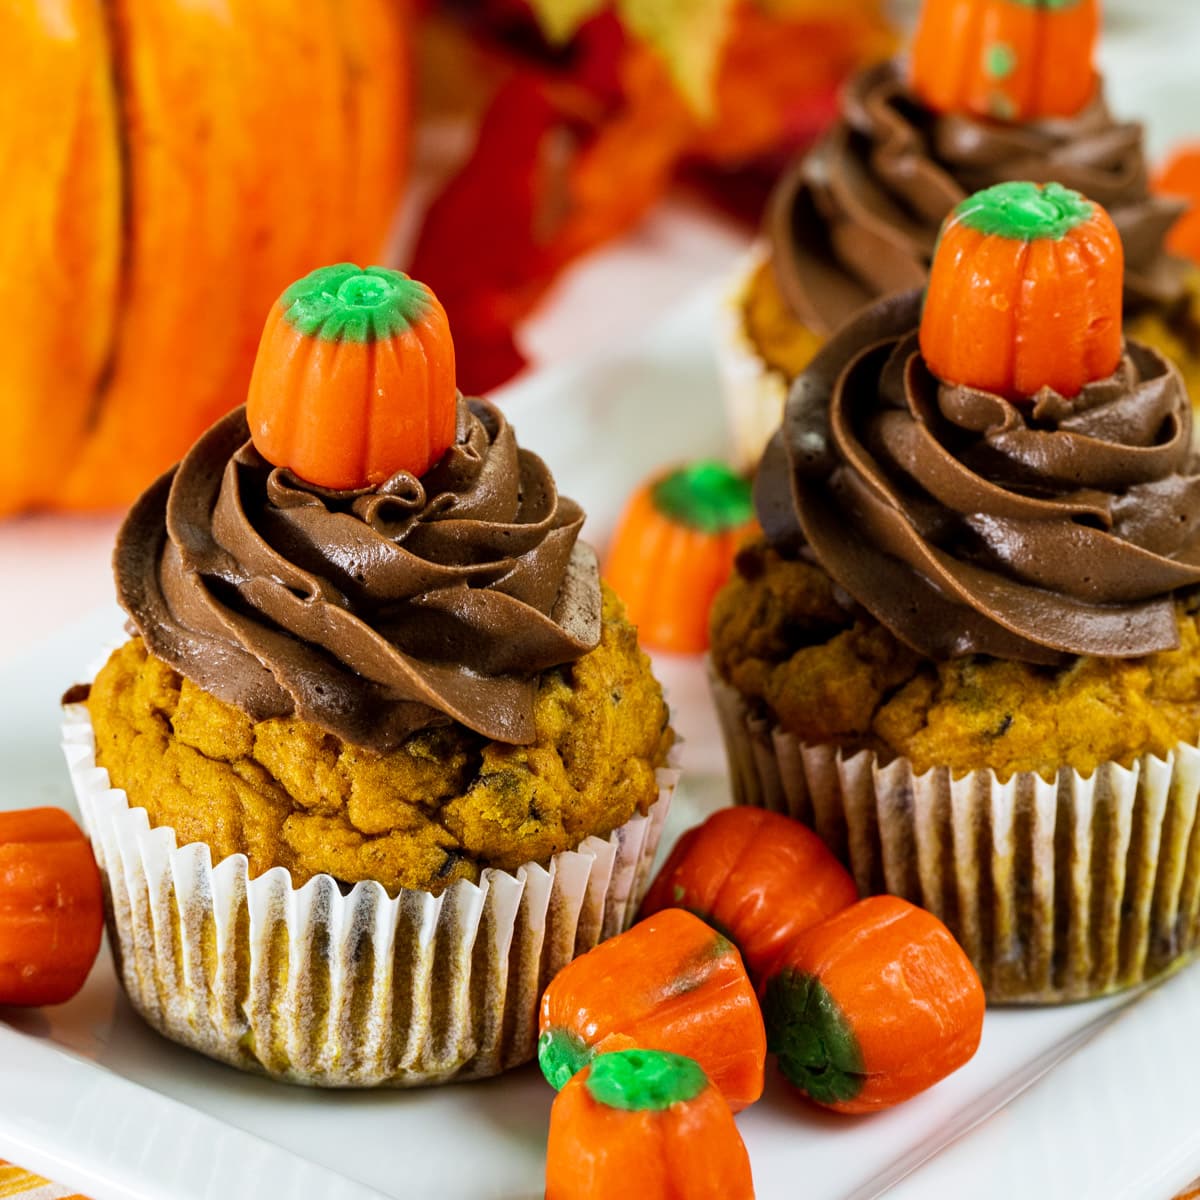 Pumpkin Chocolate Chip Cupcakes with Chocolate Frosting surrounded by candy corn pumpkins.